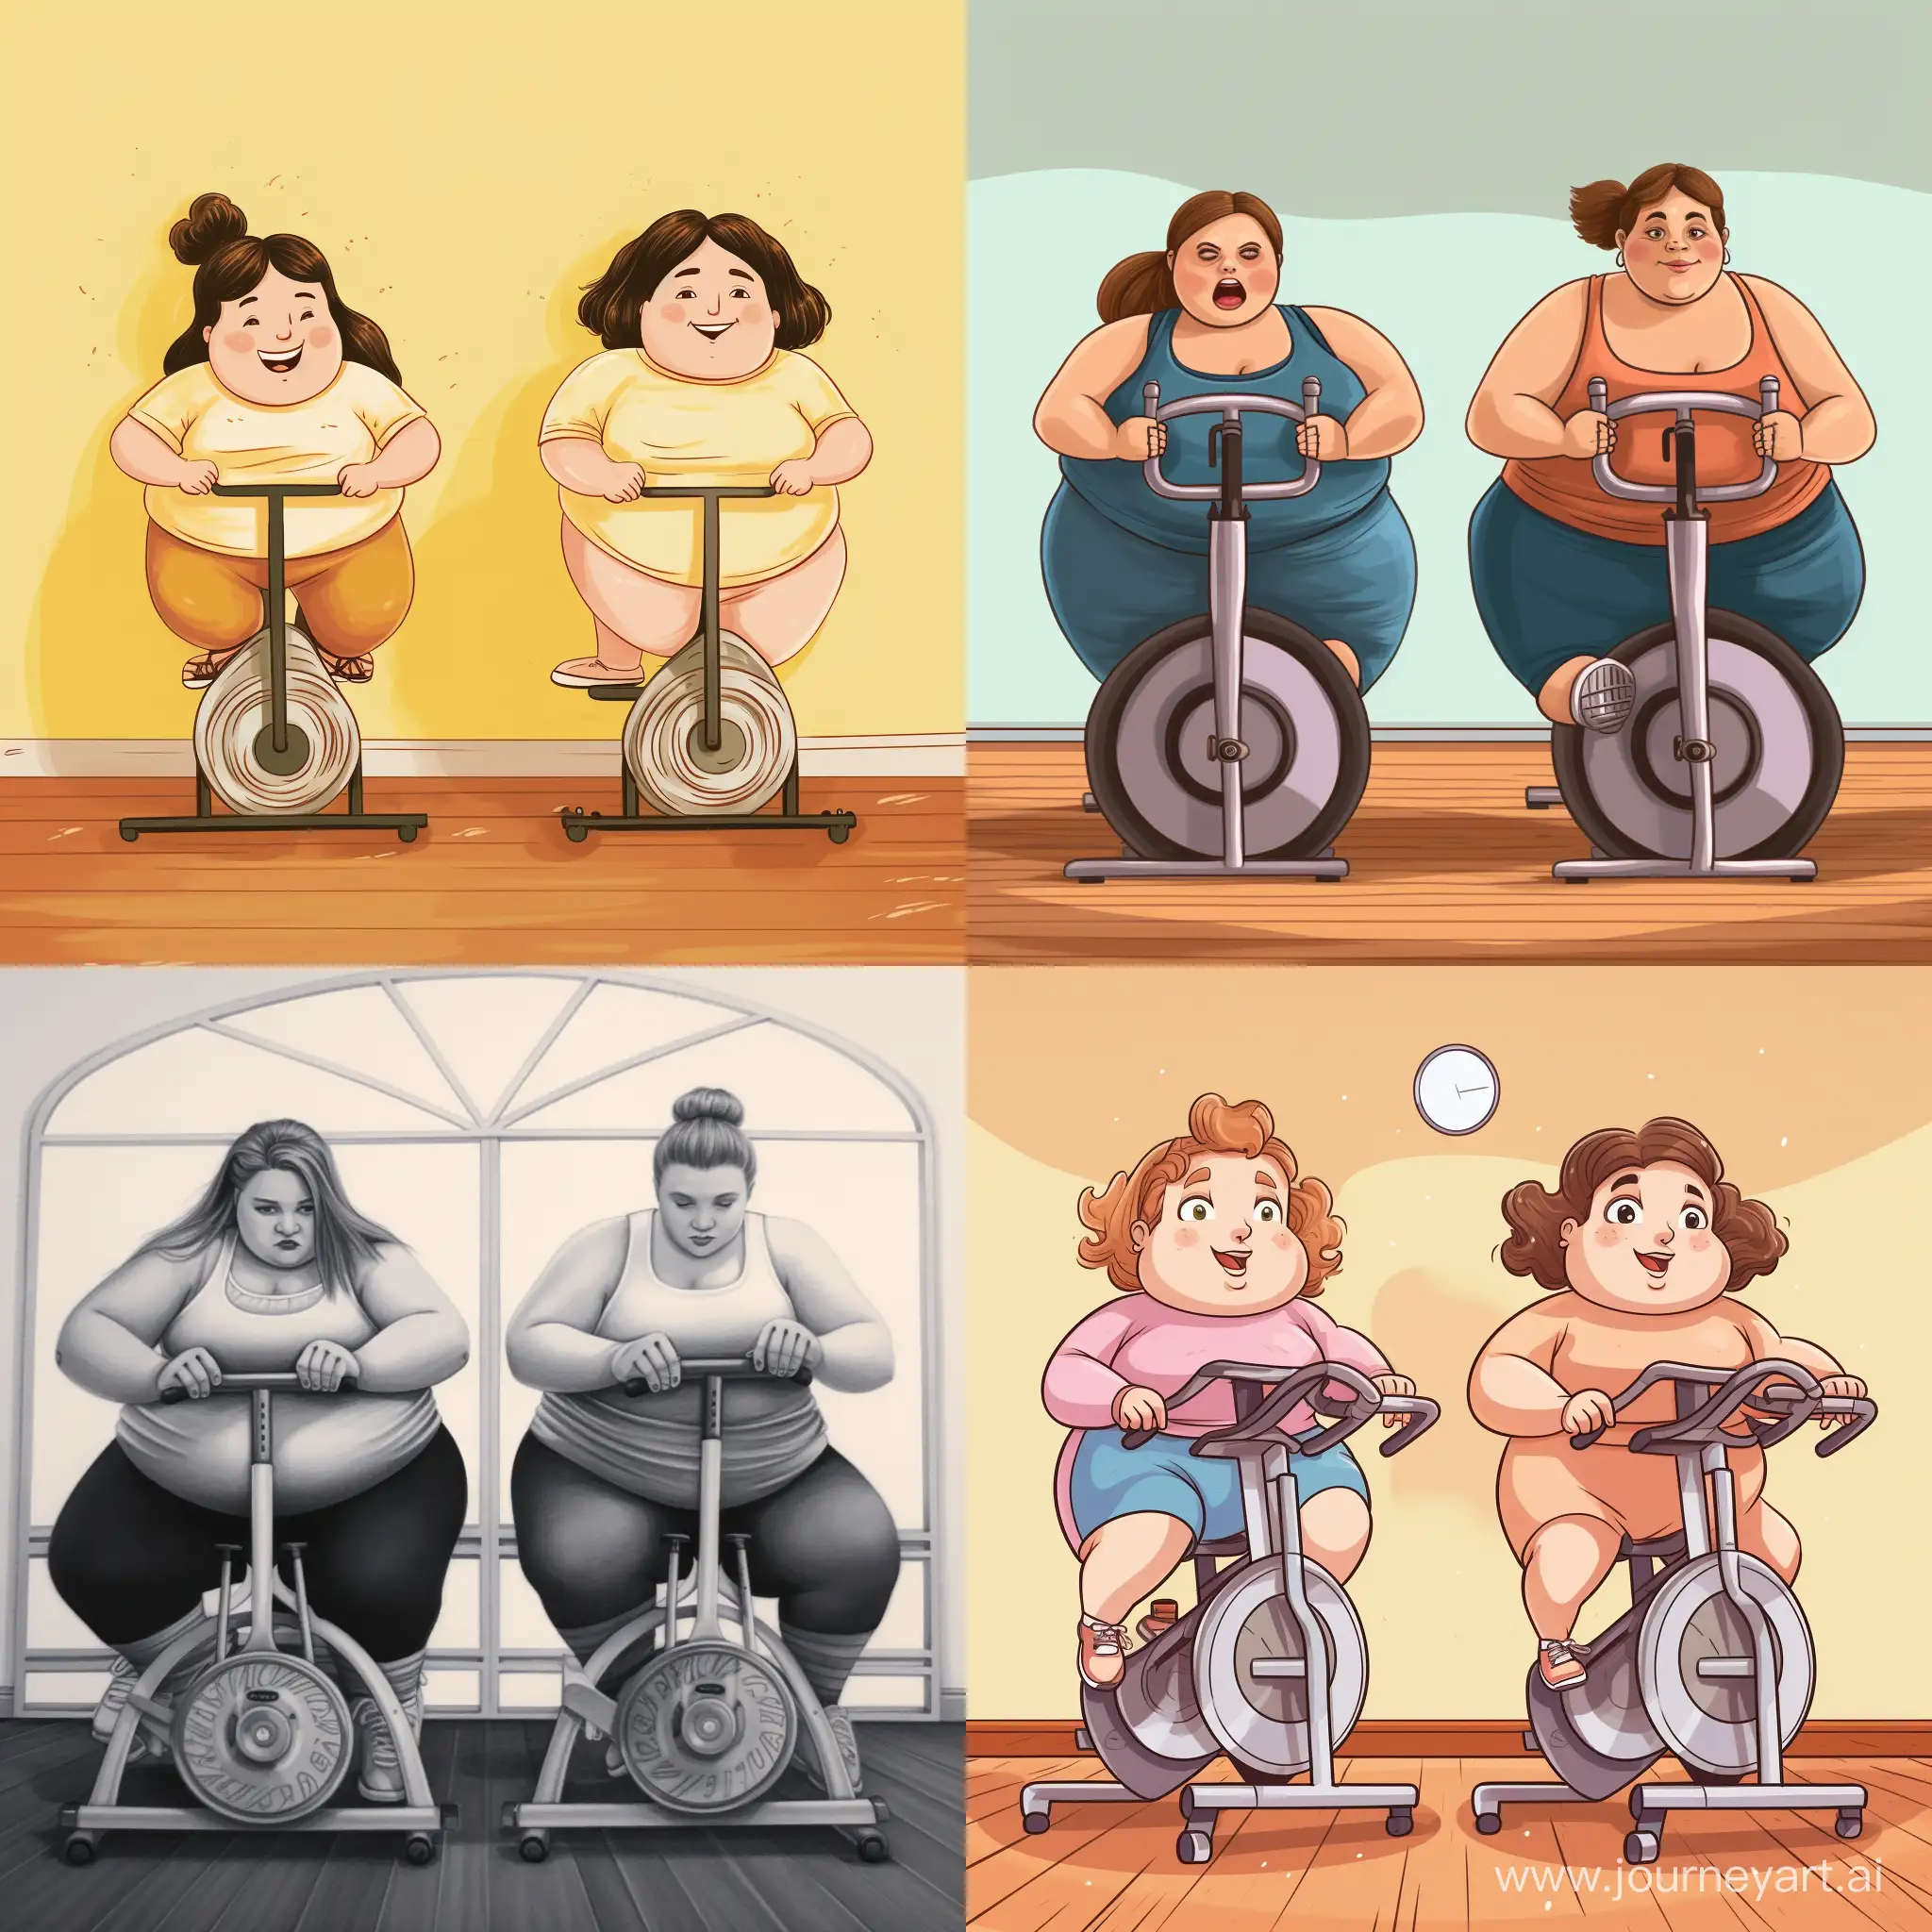 draw two identical fat girls side by side.the first girl dreams of losing weight, the second girl is engaged in an exercise bike